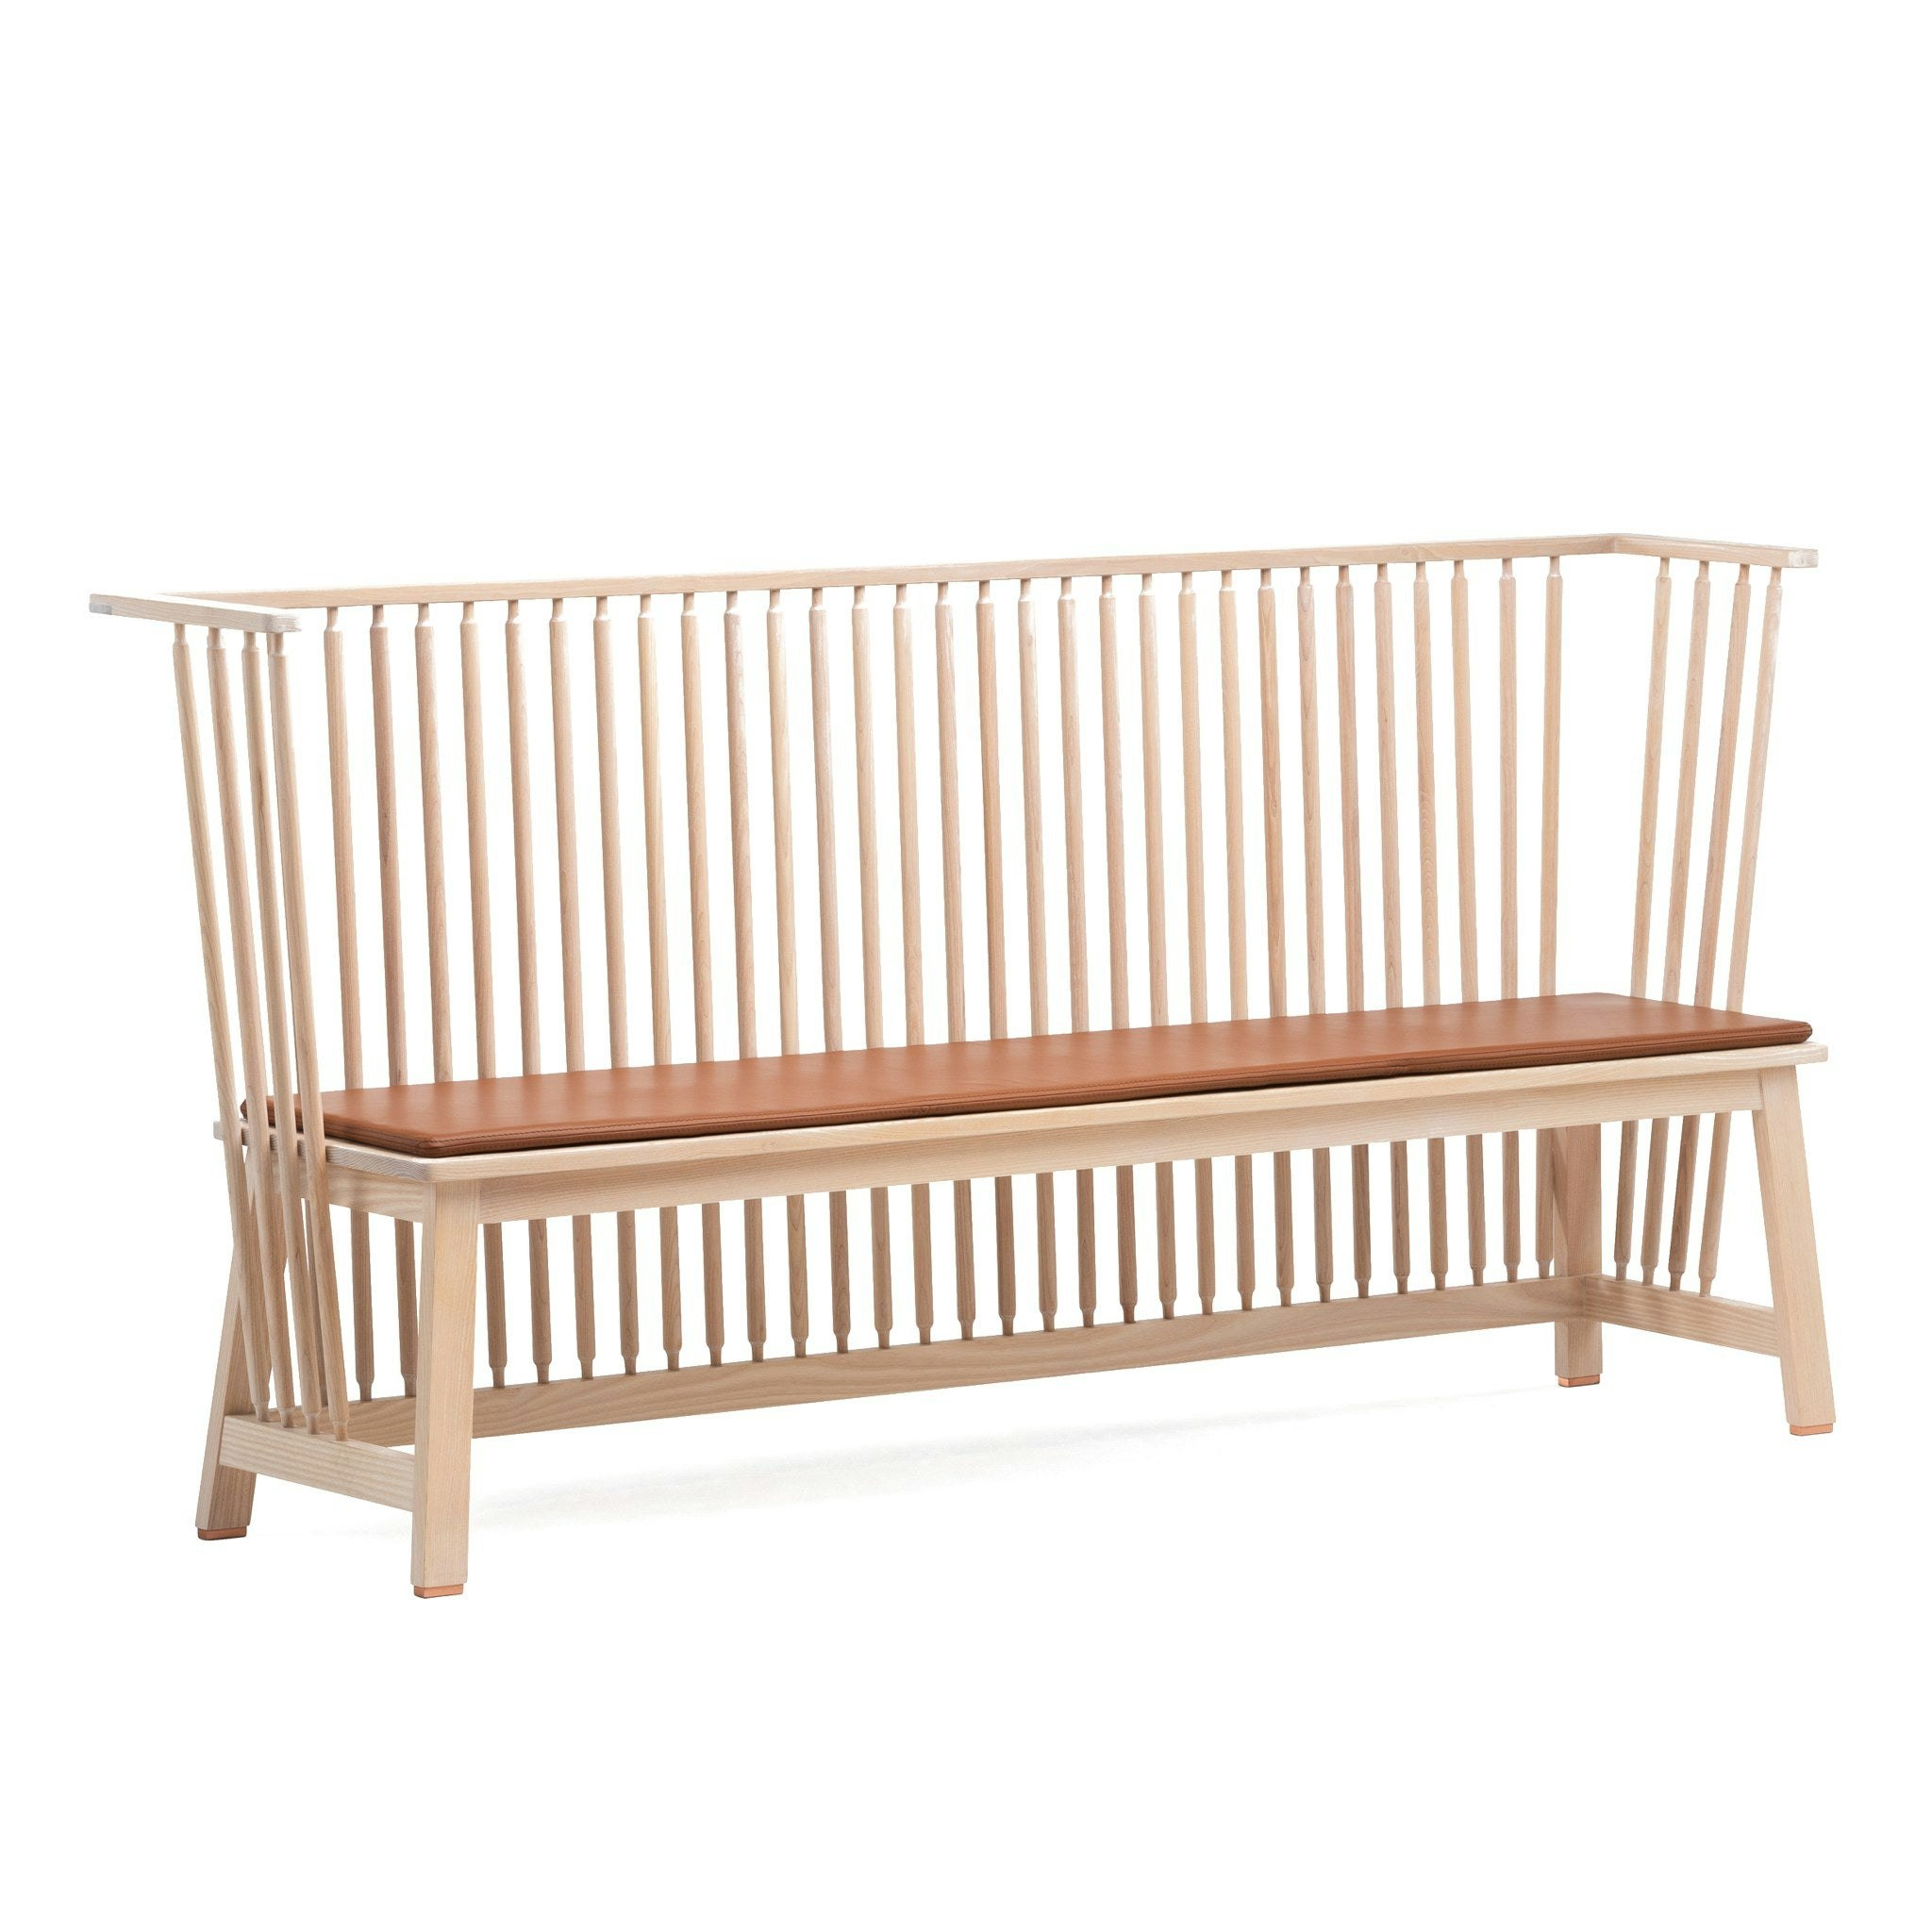 445 3-Seater Low Settle Bench / White Oiled Oak / Leather Seat Pad by Ilse Crawford - clearance